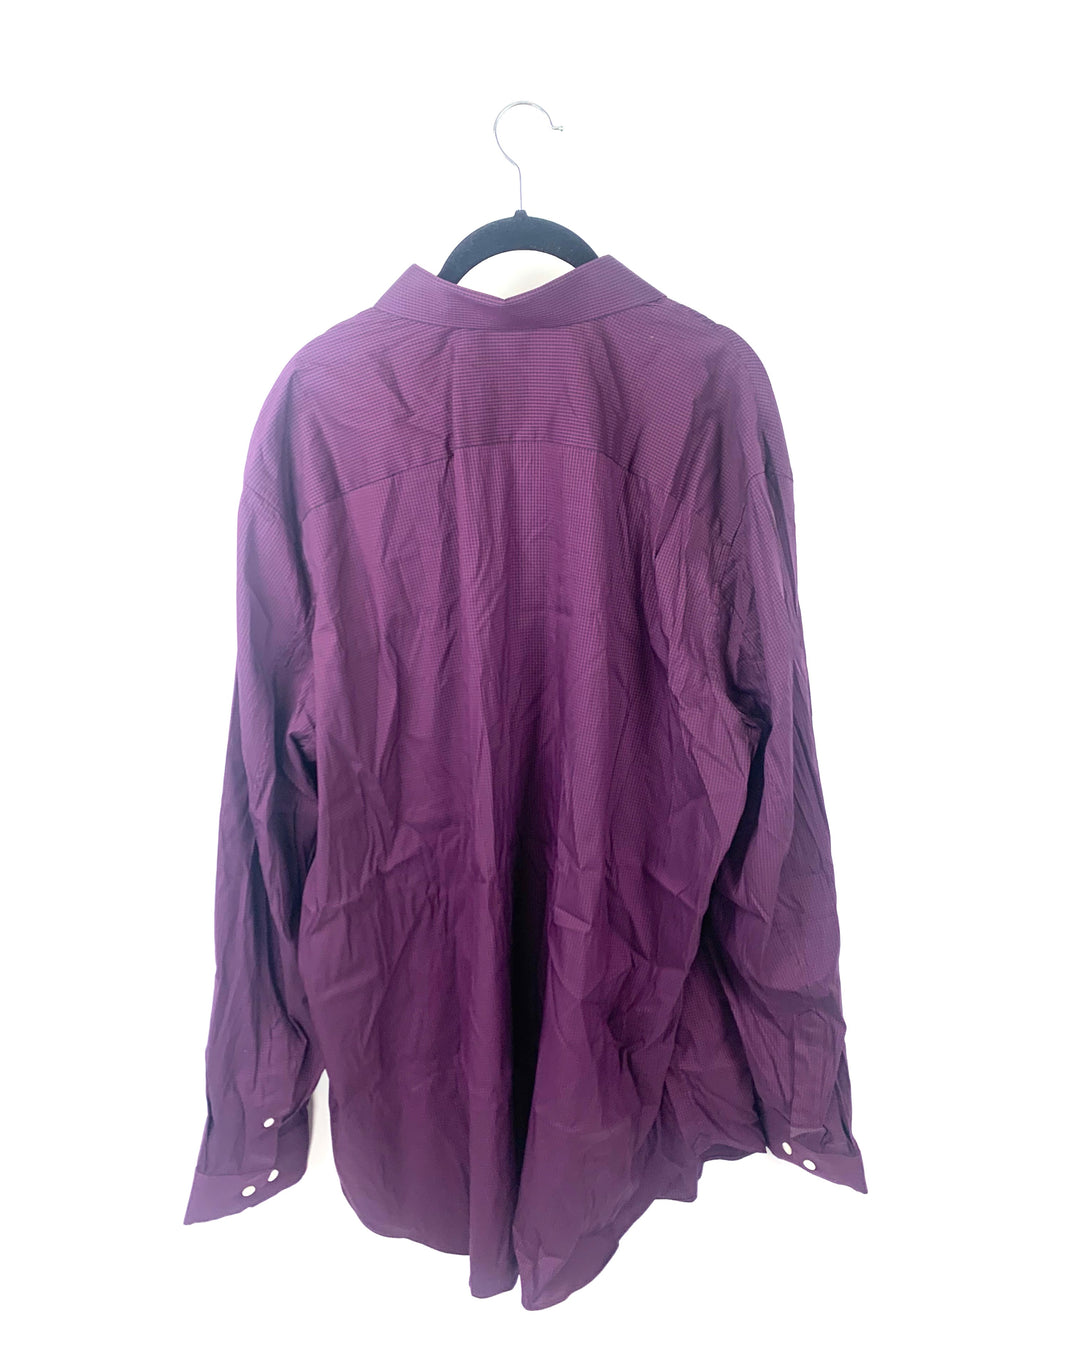 MENS Long Sleeve Purple And Navy Shirt - Size 20/38